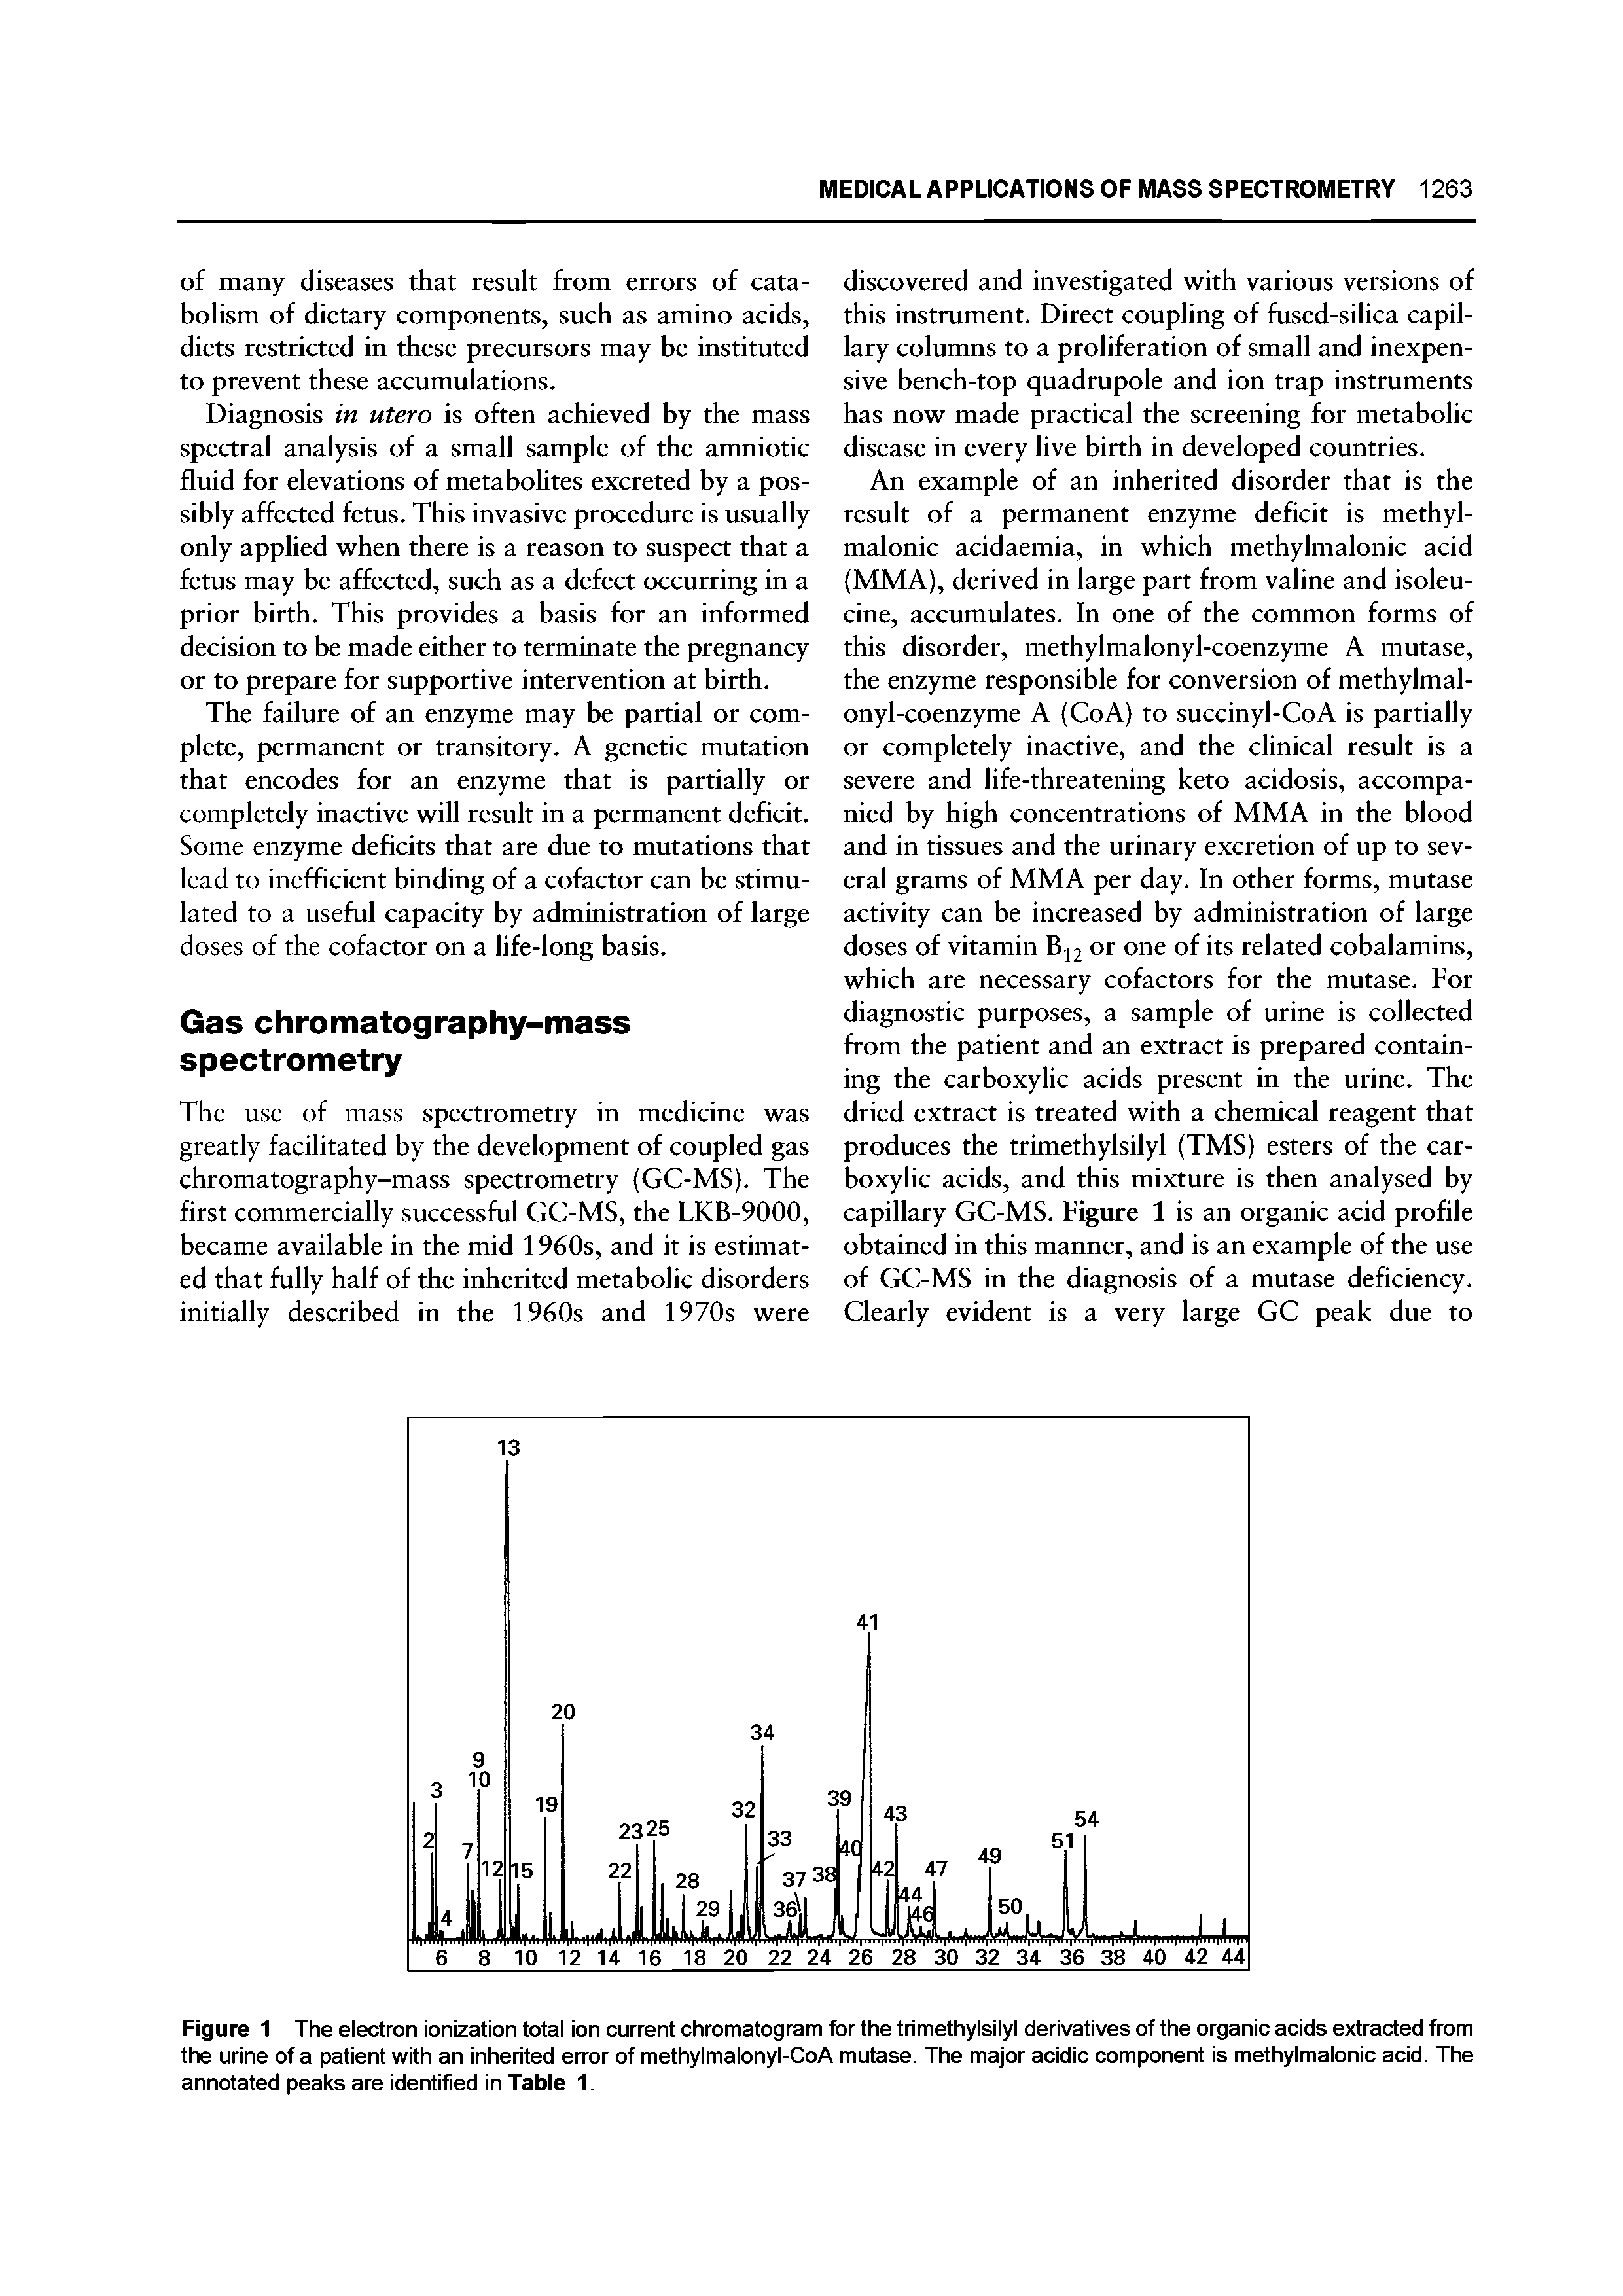 Figure 1 The electron ionization total ion current chromatogram for the trimethylsilyl derivatives of the organic acids extracted from the urine of a patient with an inherited error of methylmalonyl-CoA mutase. The major acidic component is methylmalonic acid. The annotated peaks are identified in Table 1.